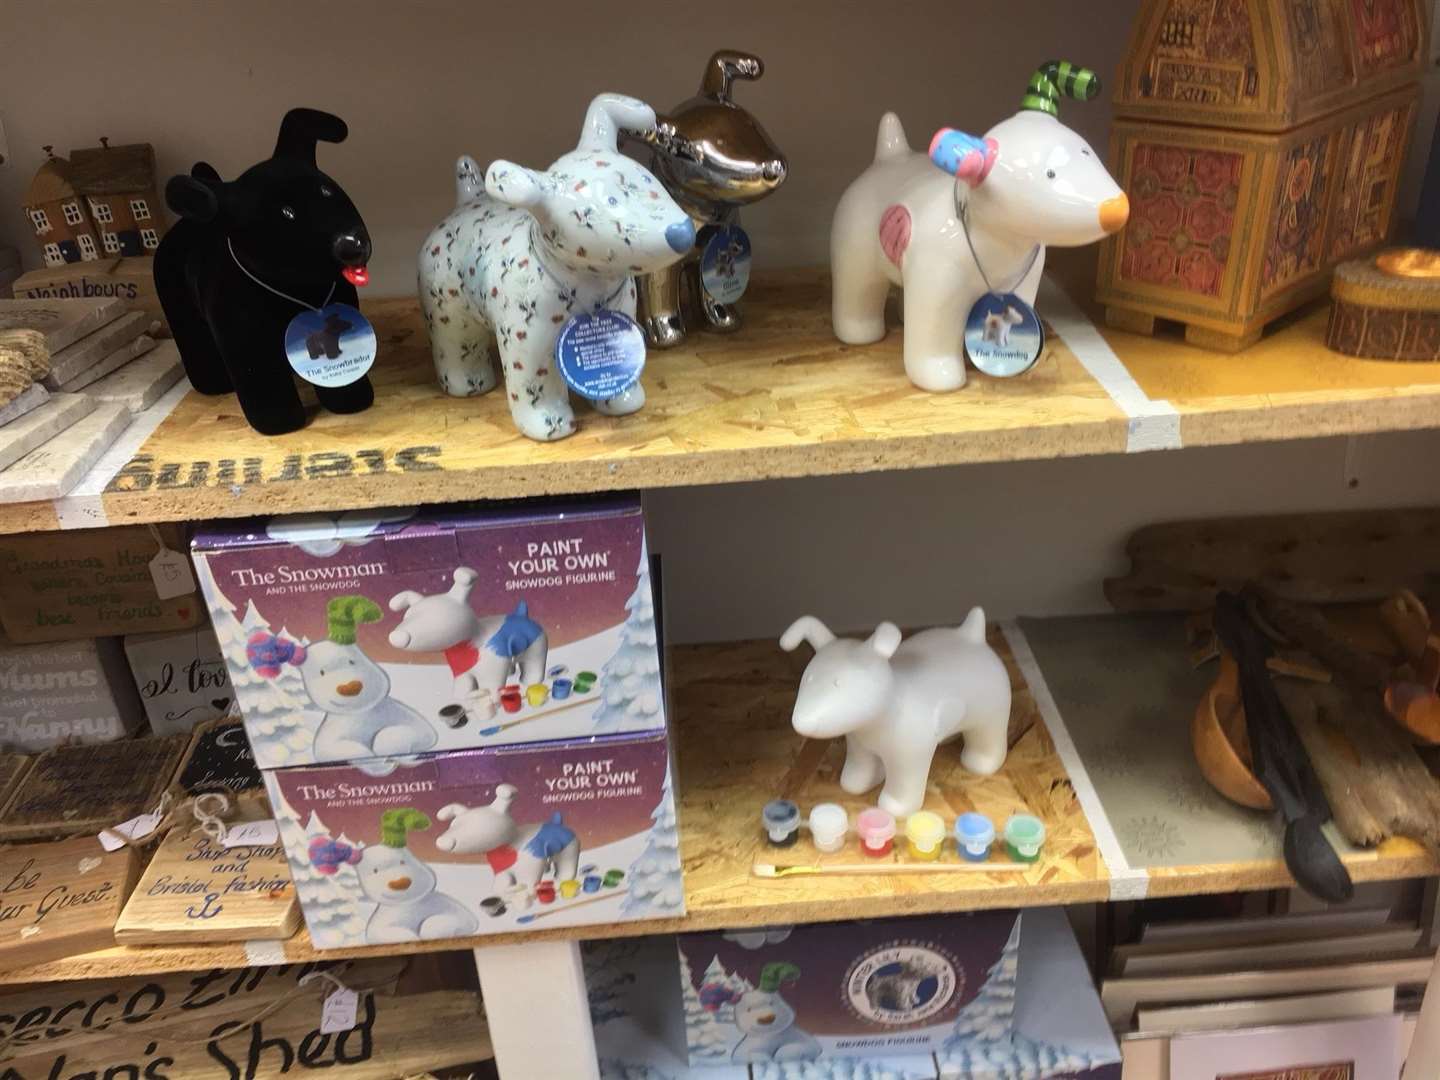 Both versions of the Snowdogs can be bought in Made in Ashford and the Tourist Information Centre.